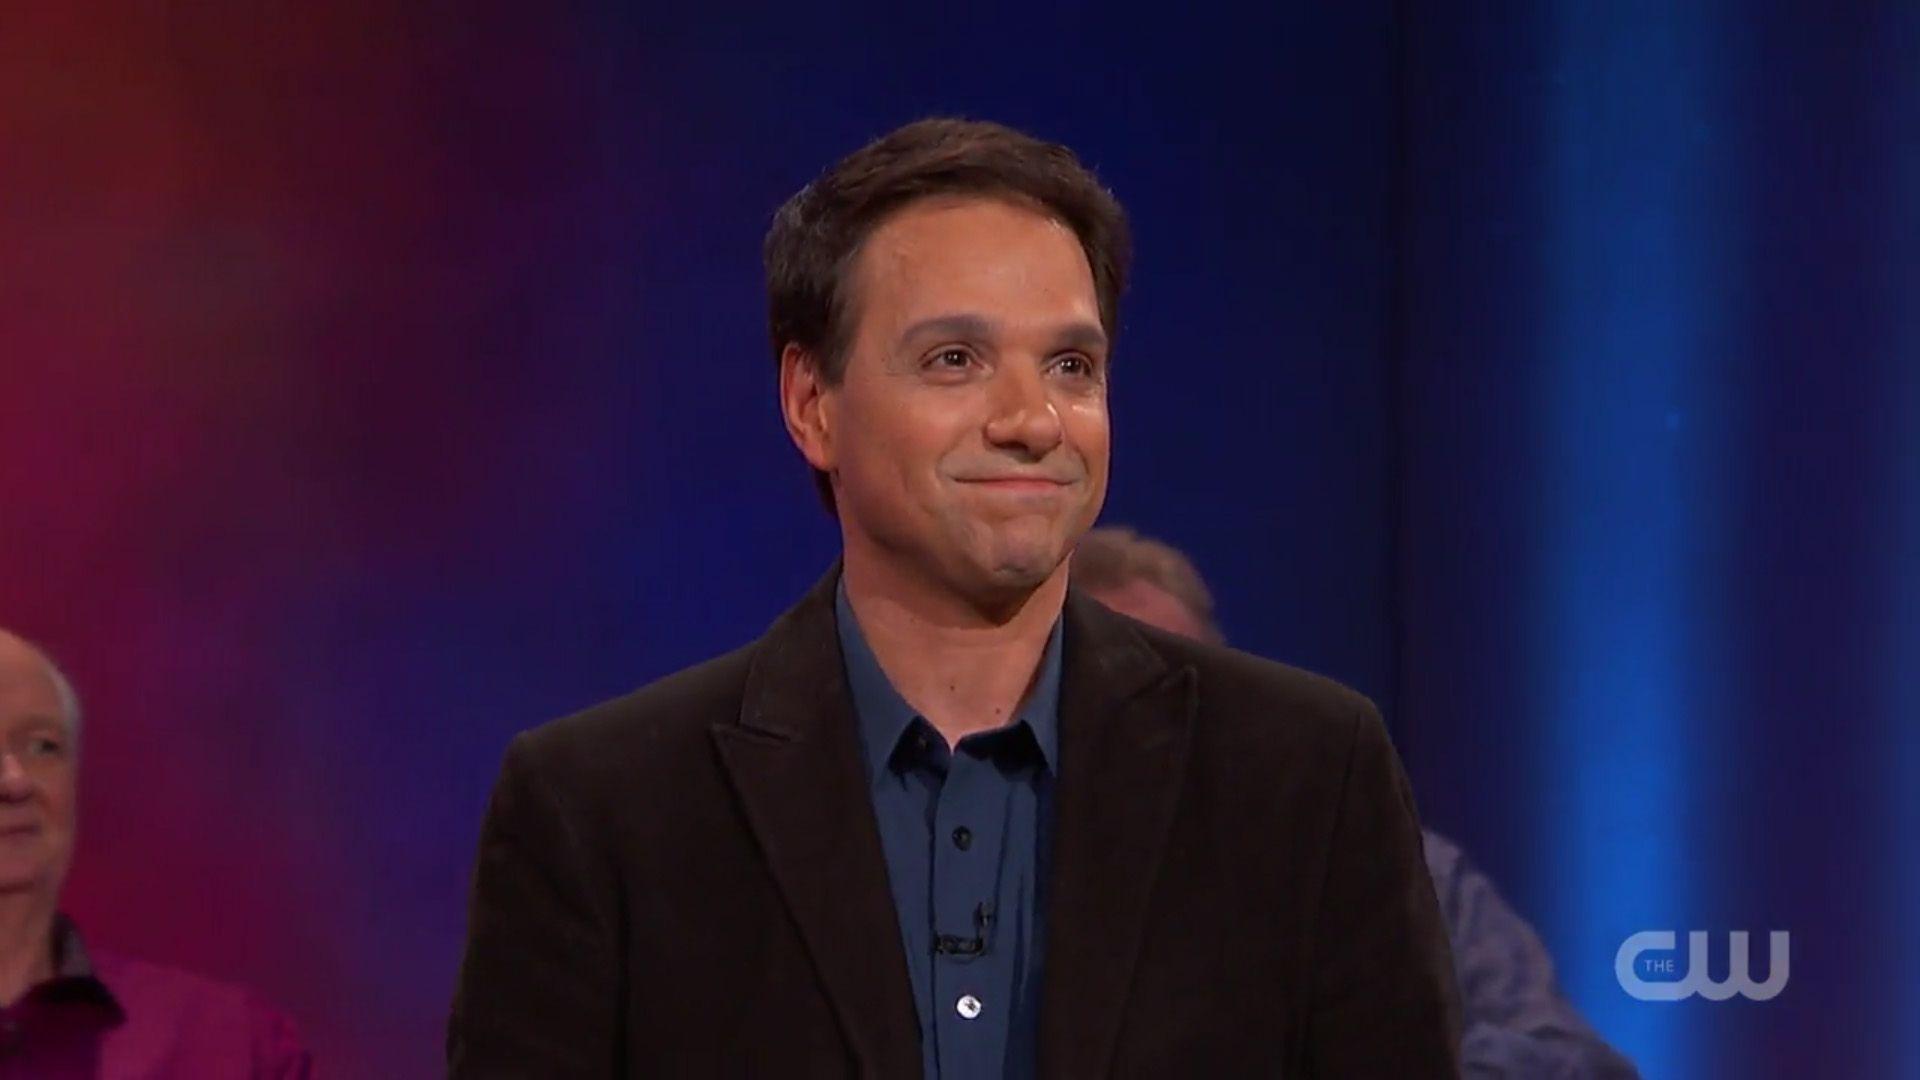 Ralph Macchio. Whose Line Is It Anyway